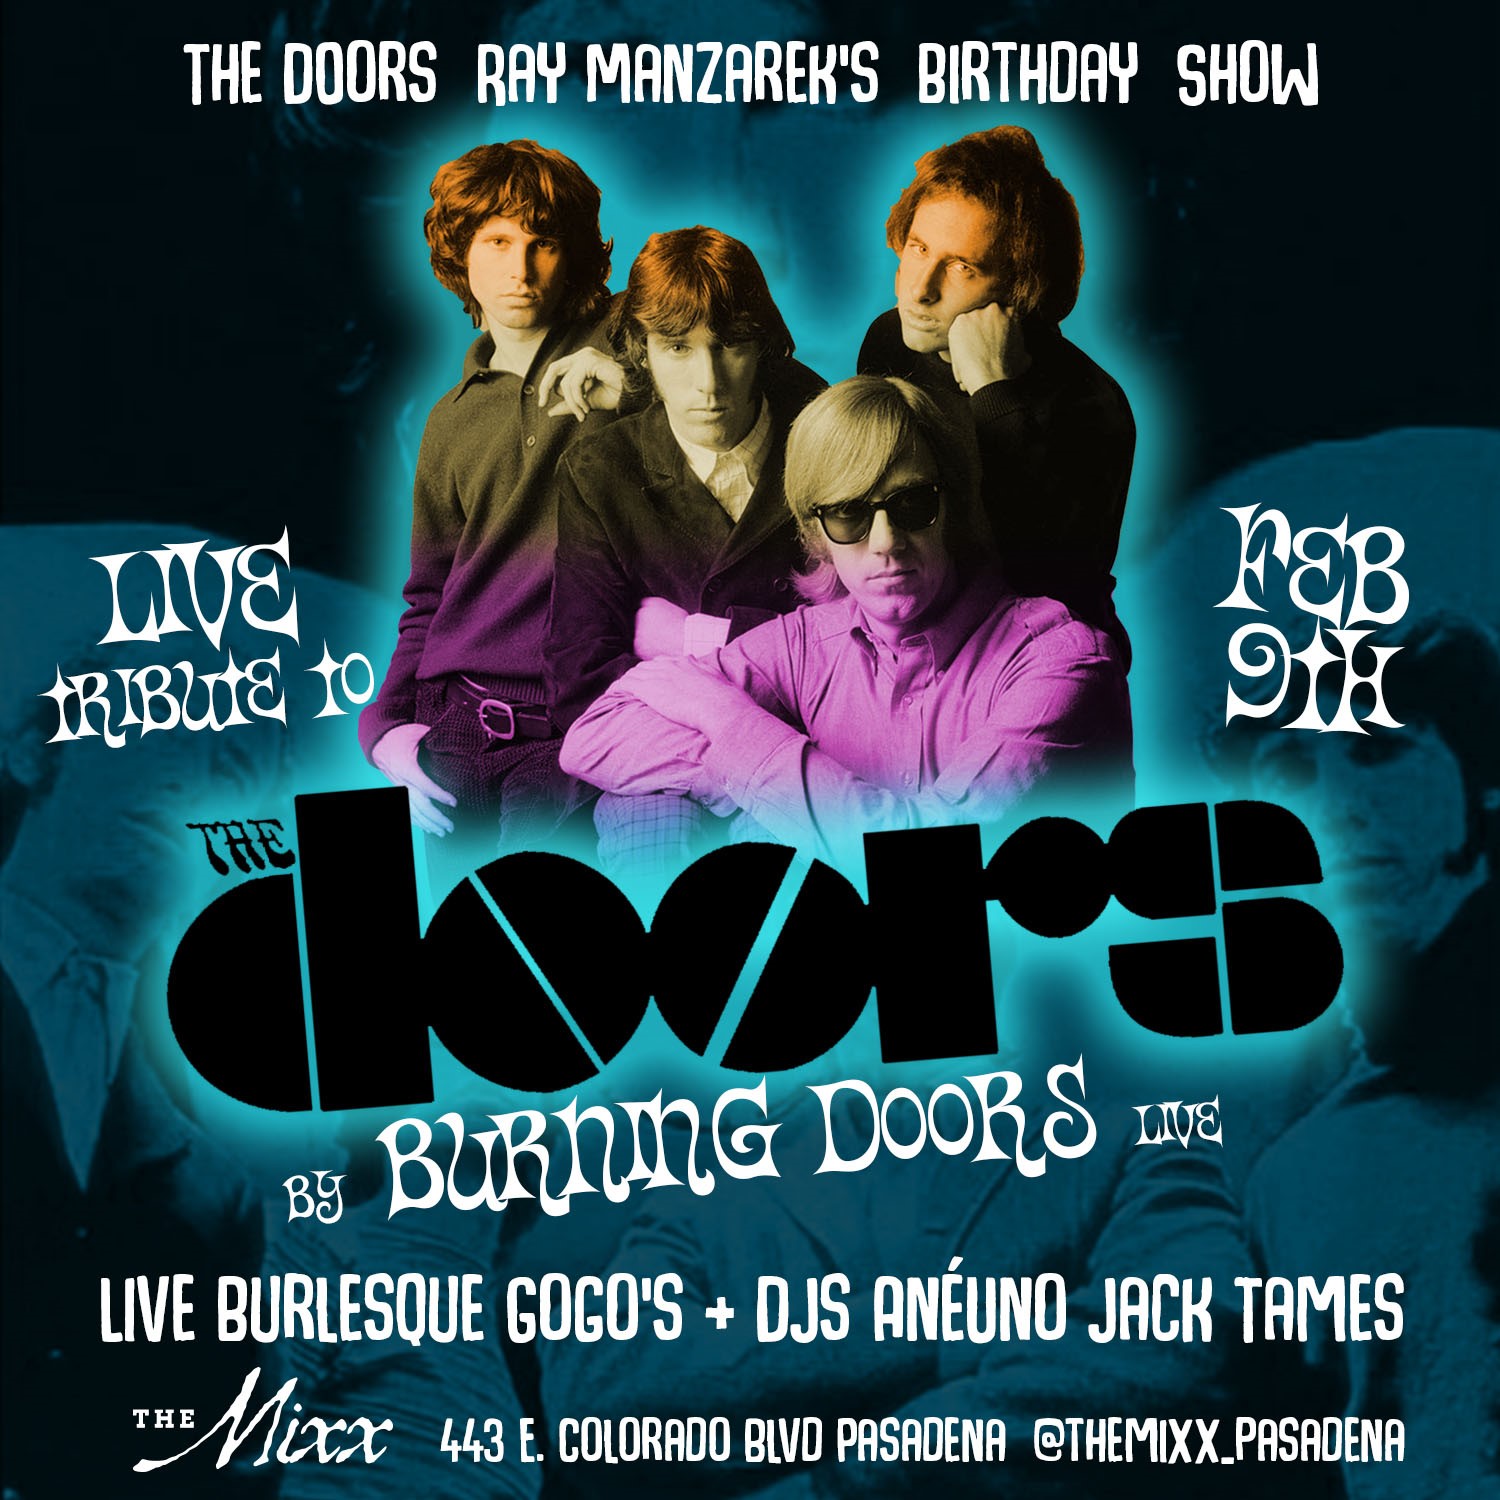 You are currently viewing The Doors Live Tribute, celebrating Ray Manzarek’s Birthday